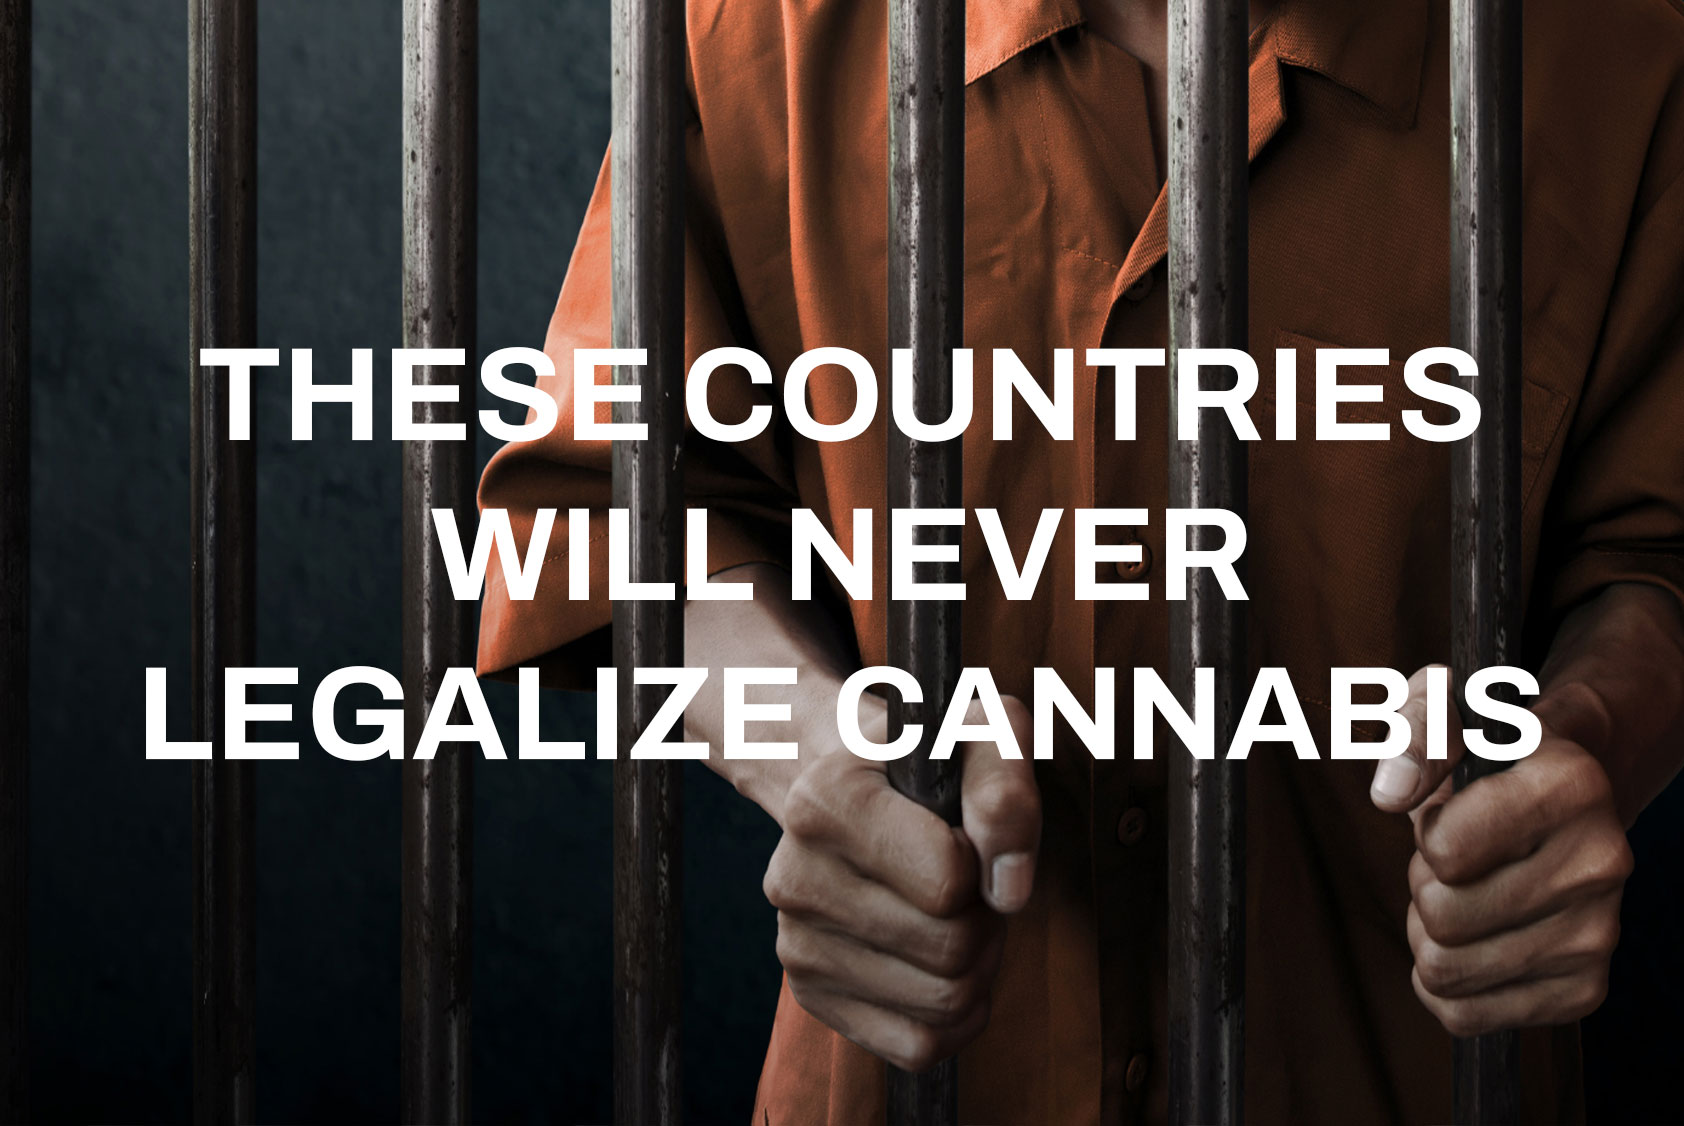 A person imprisoned in countries that will never legalize cannabis